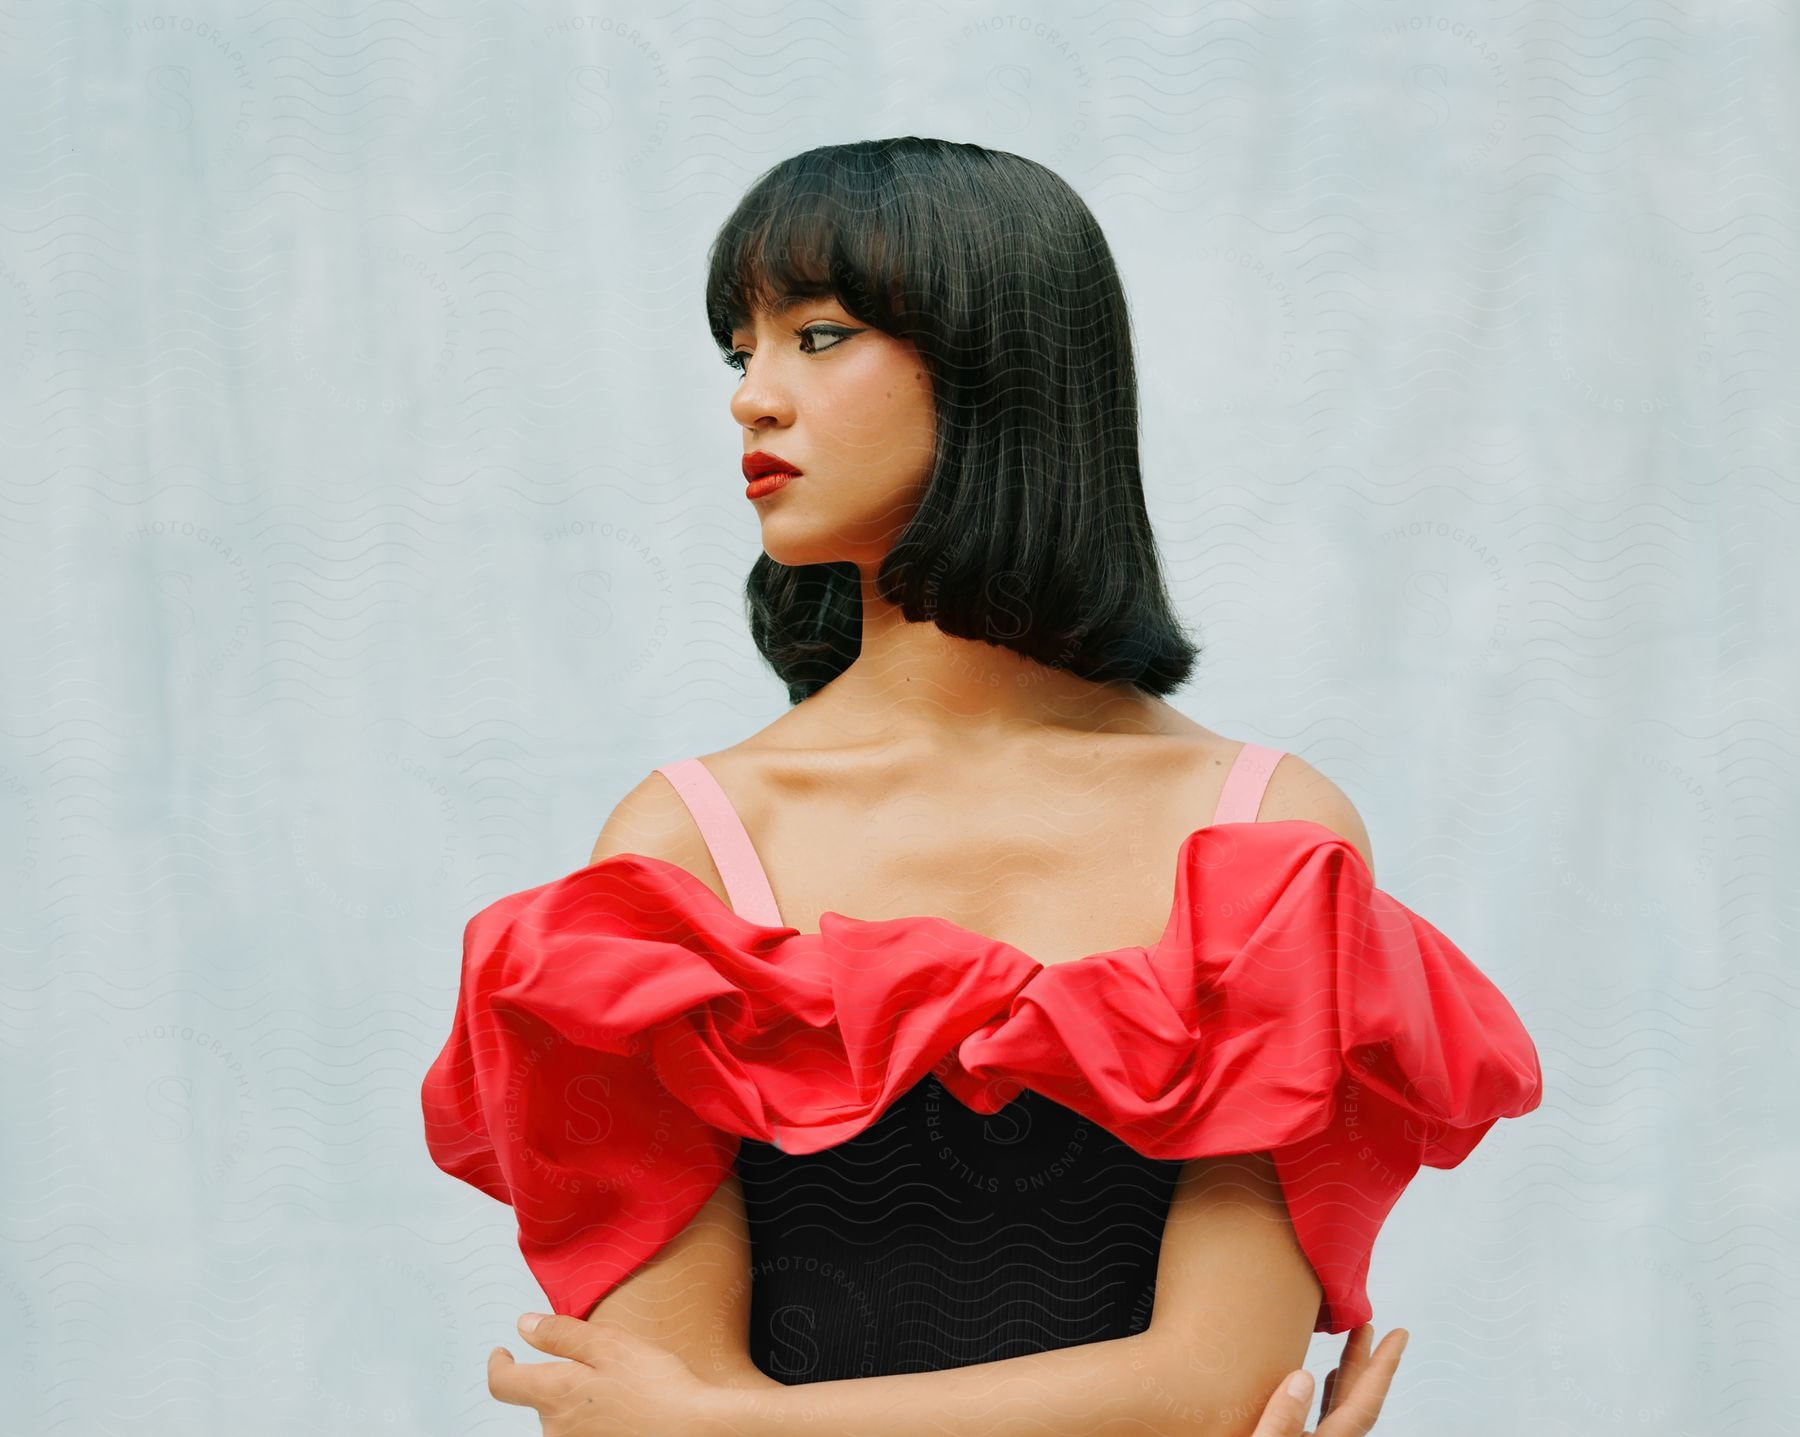 An Asian woman in a black dress with red ruff and pink shoulder straps.